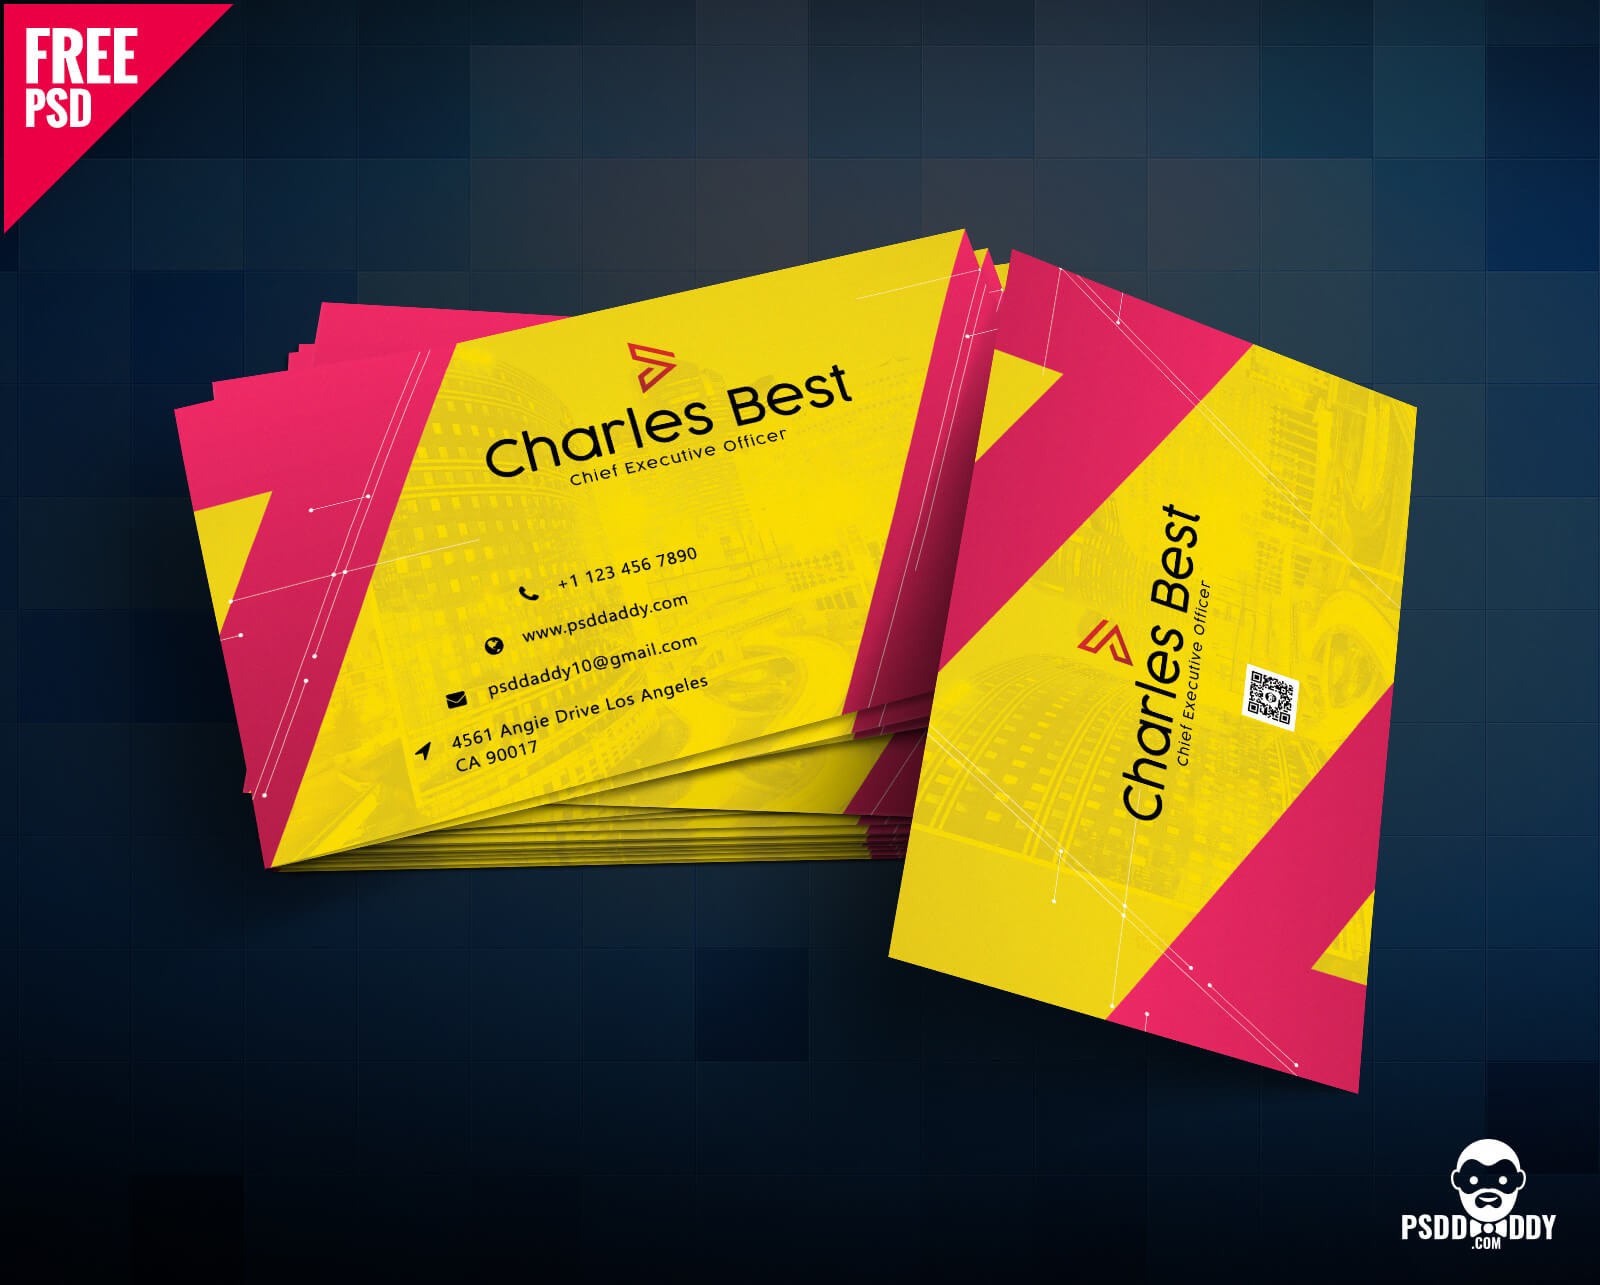 Download] Creative Business Card Free Psd | Psddaddy Inside Business Card Size Psd Template